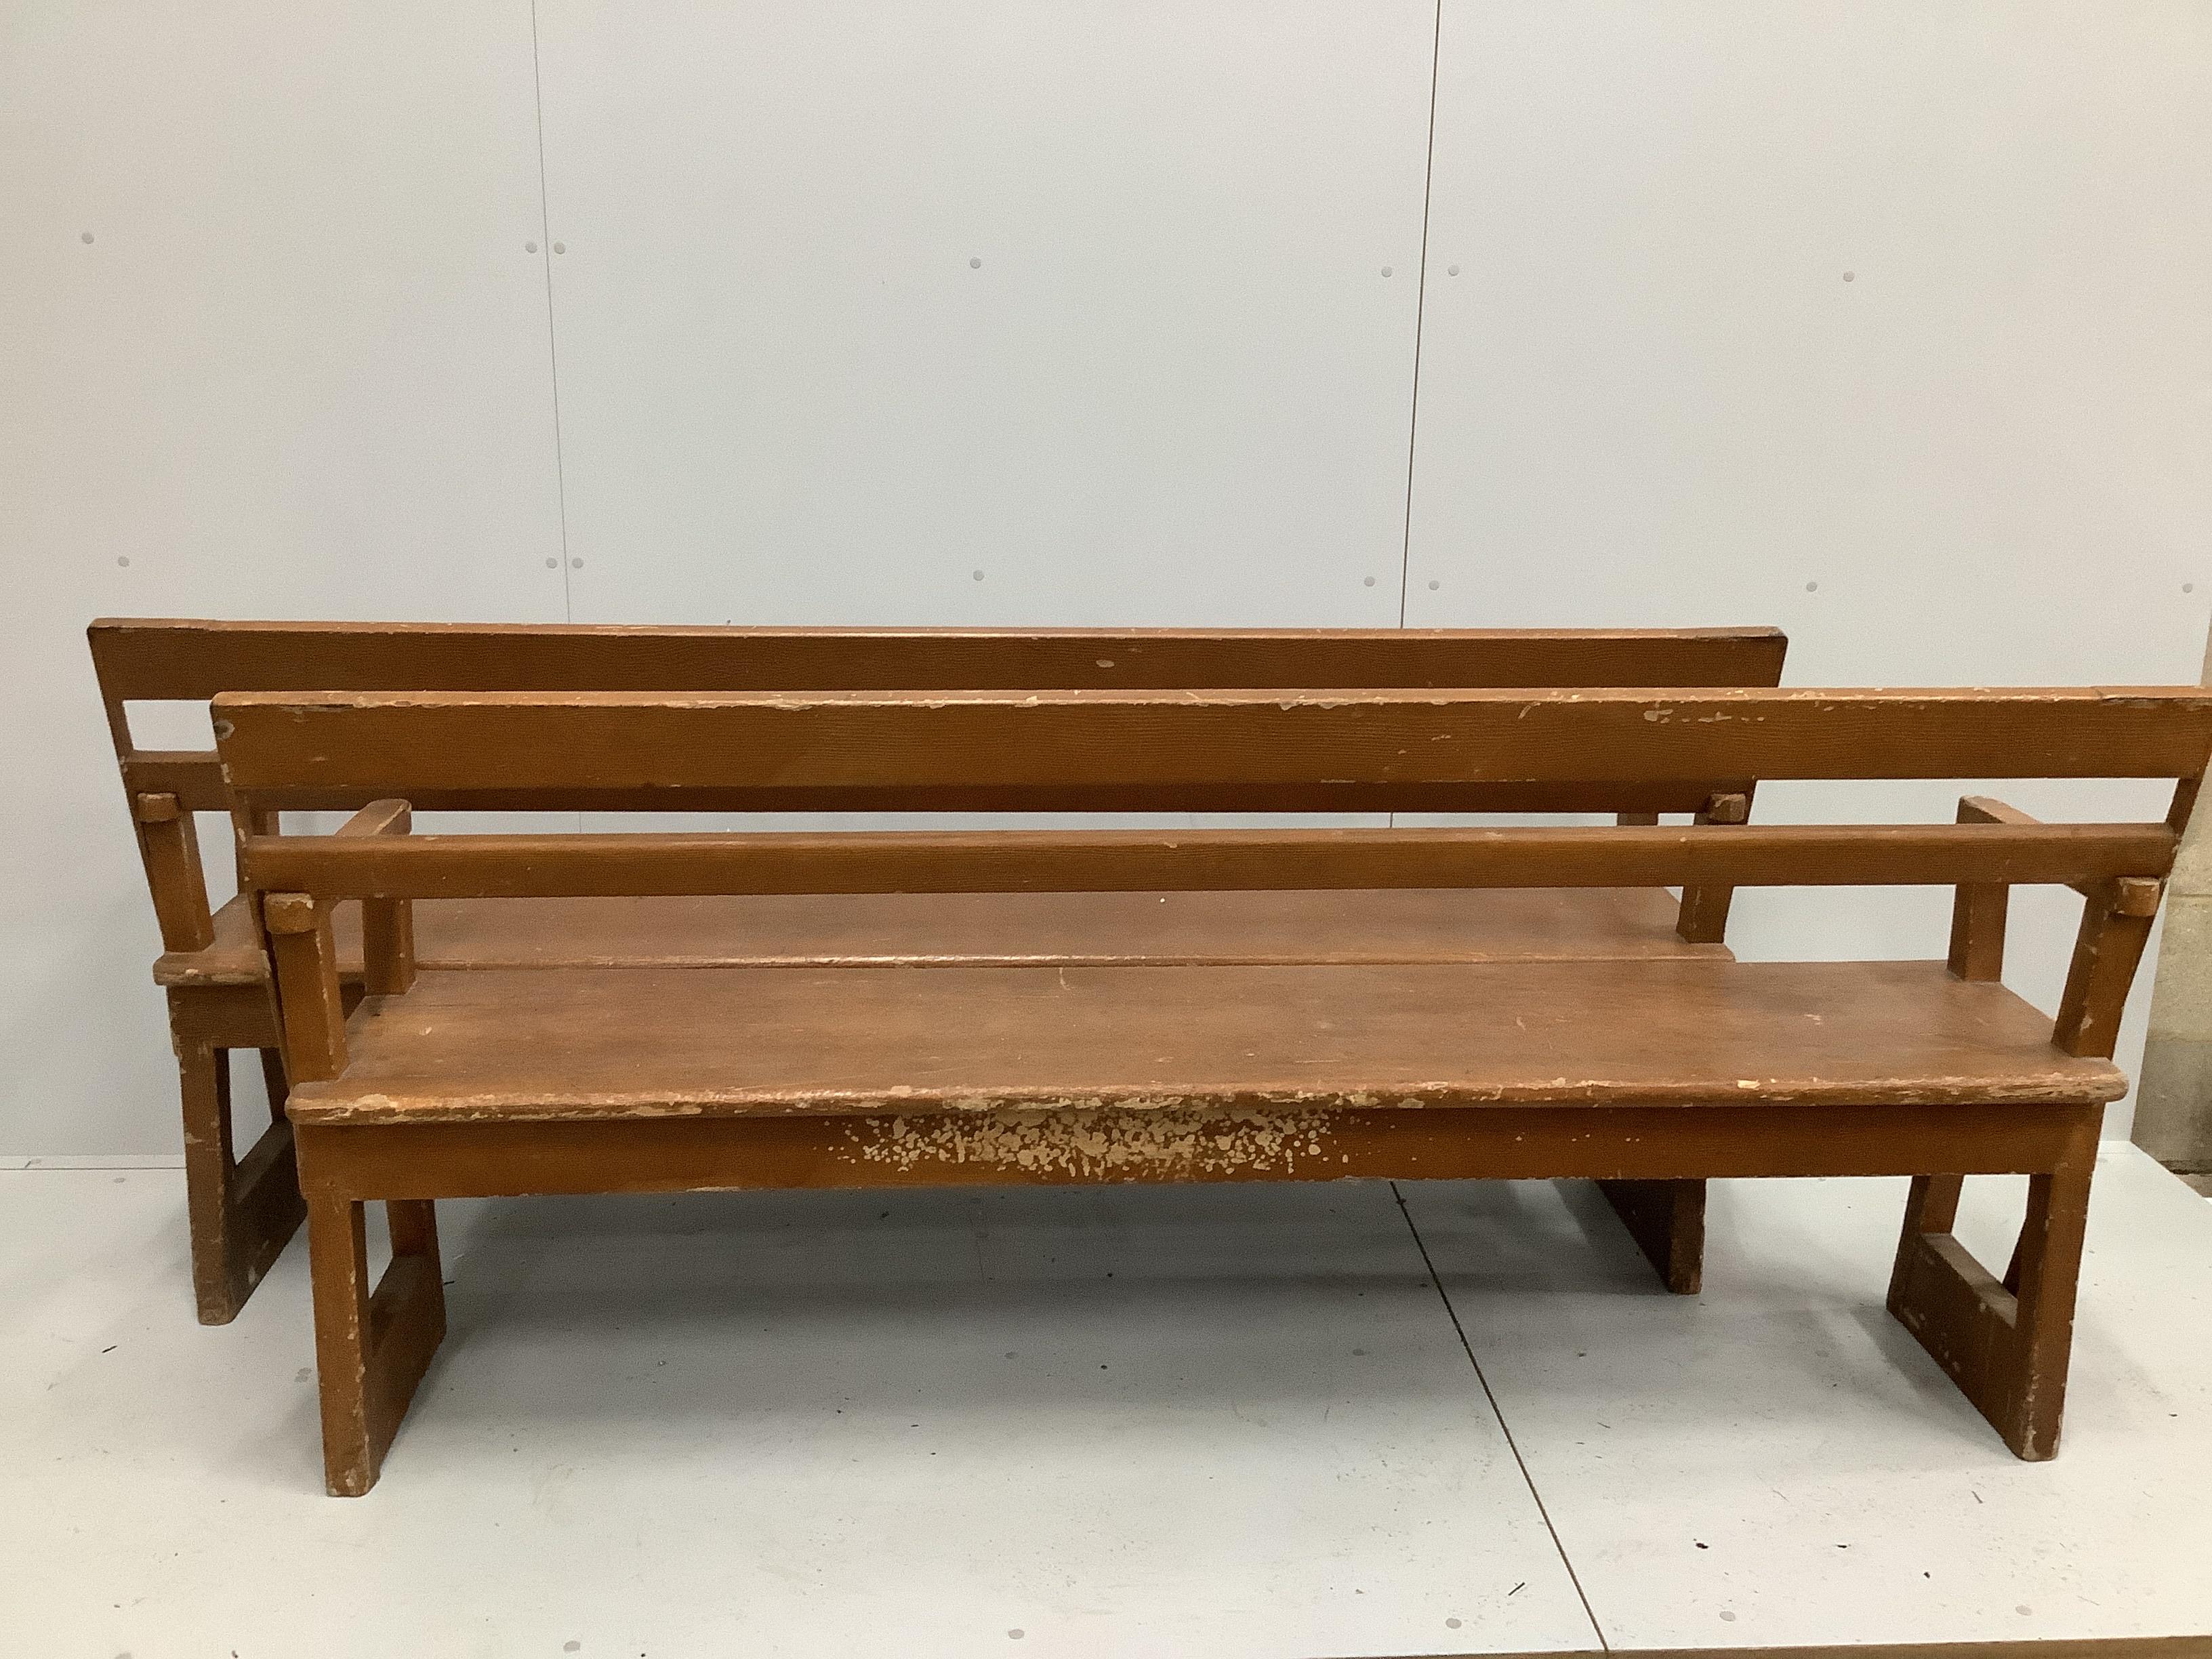 A pair of late 19th century Continental painted pine station benches with hinged adjustable backs, length 200cm, depth 41cm, height 91cm